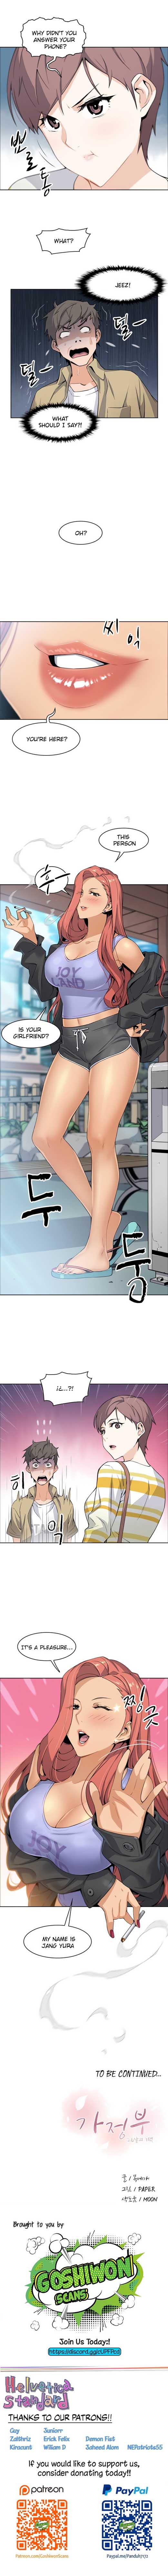 Housekeeper [Neck Pillow, Paper] Ch.49/49 [English] [Manhwa PDF] Completed 24